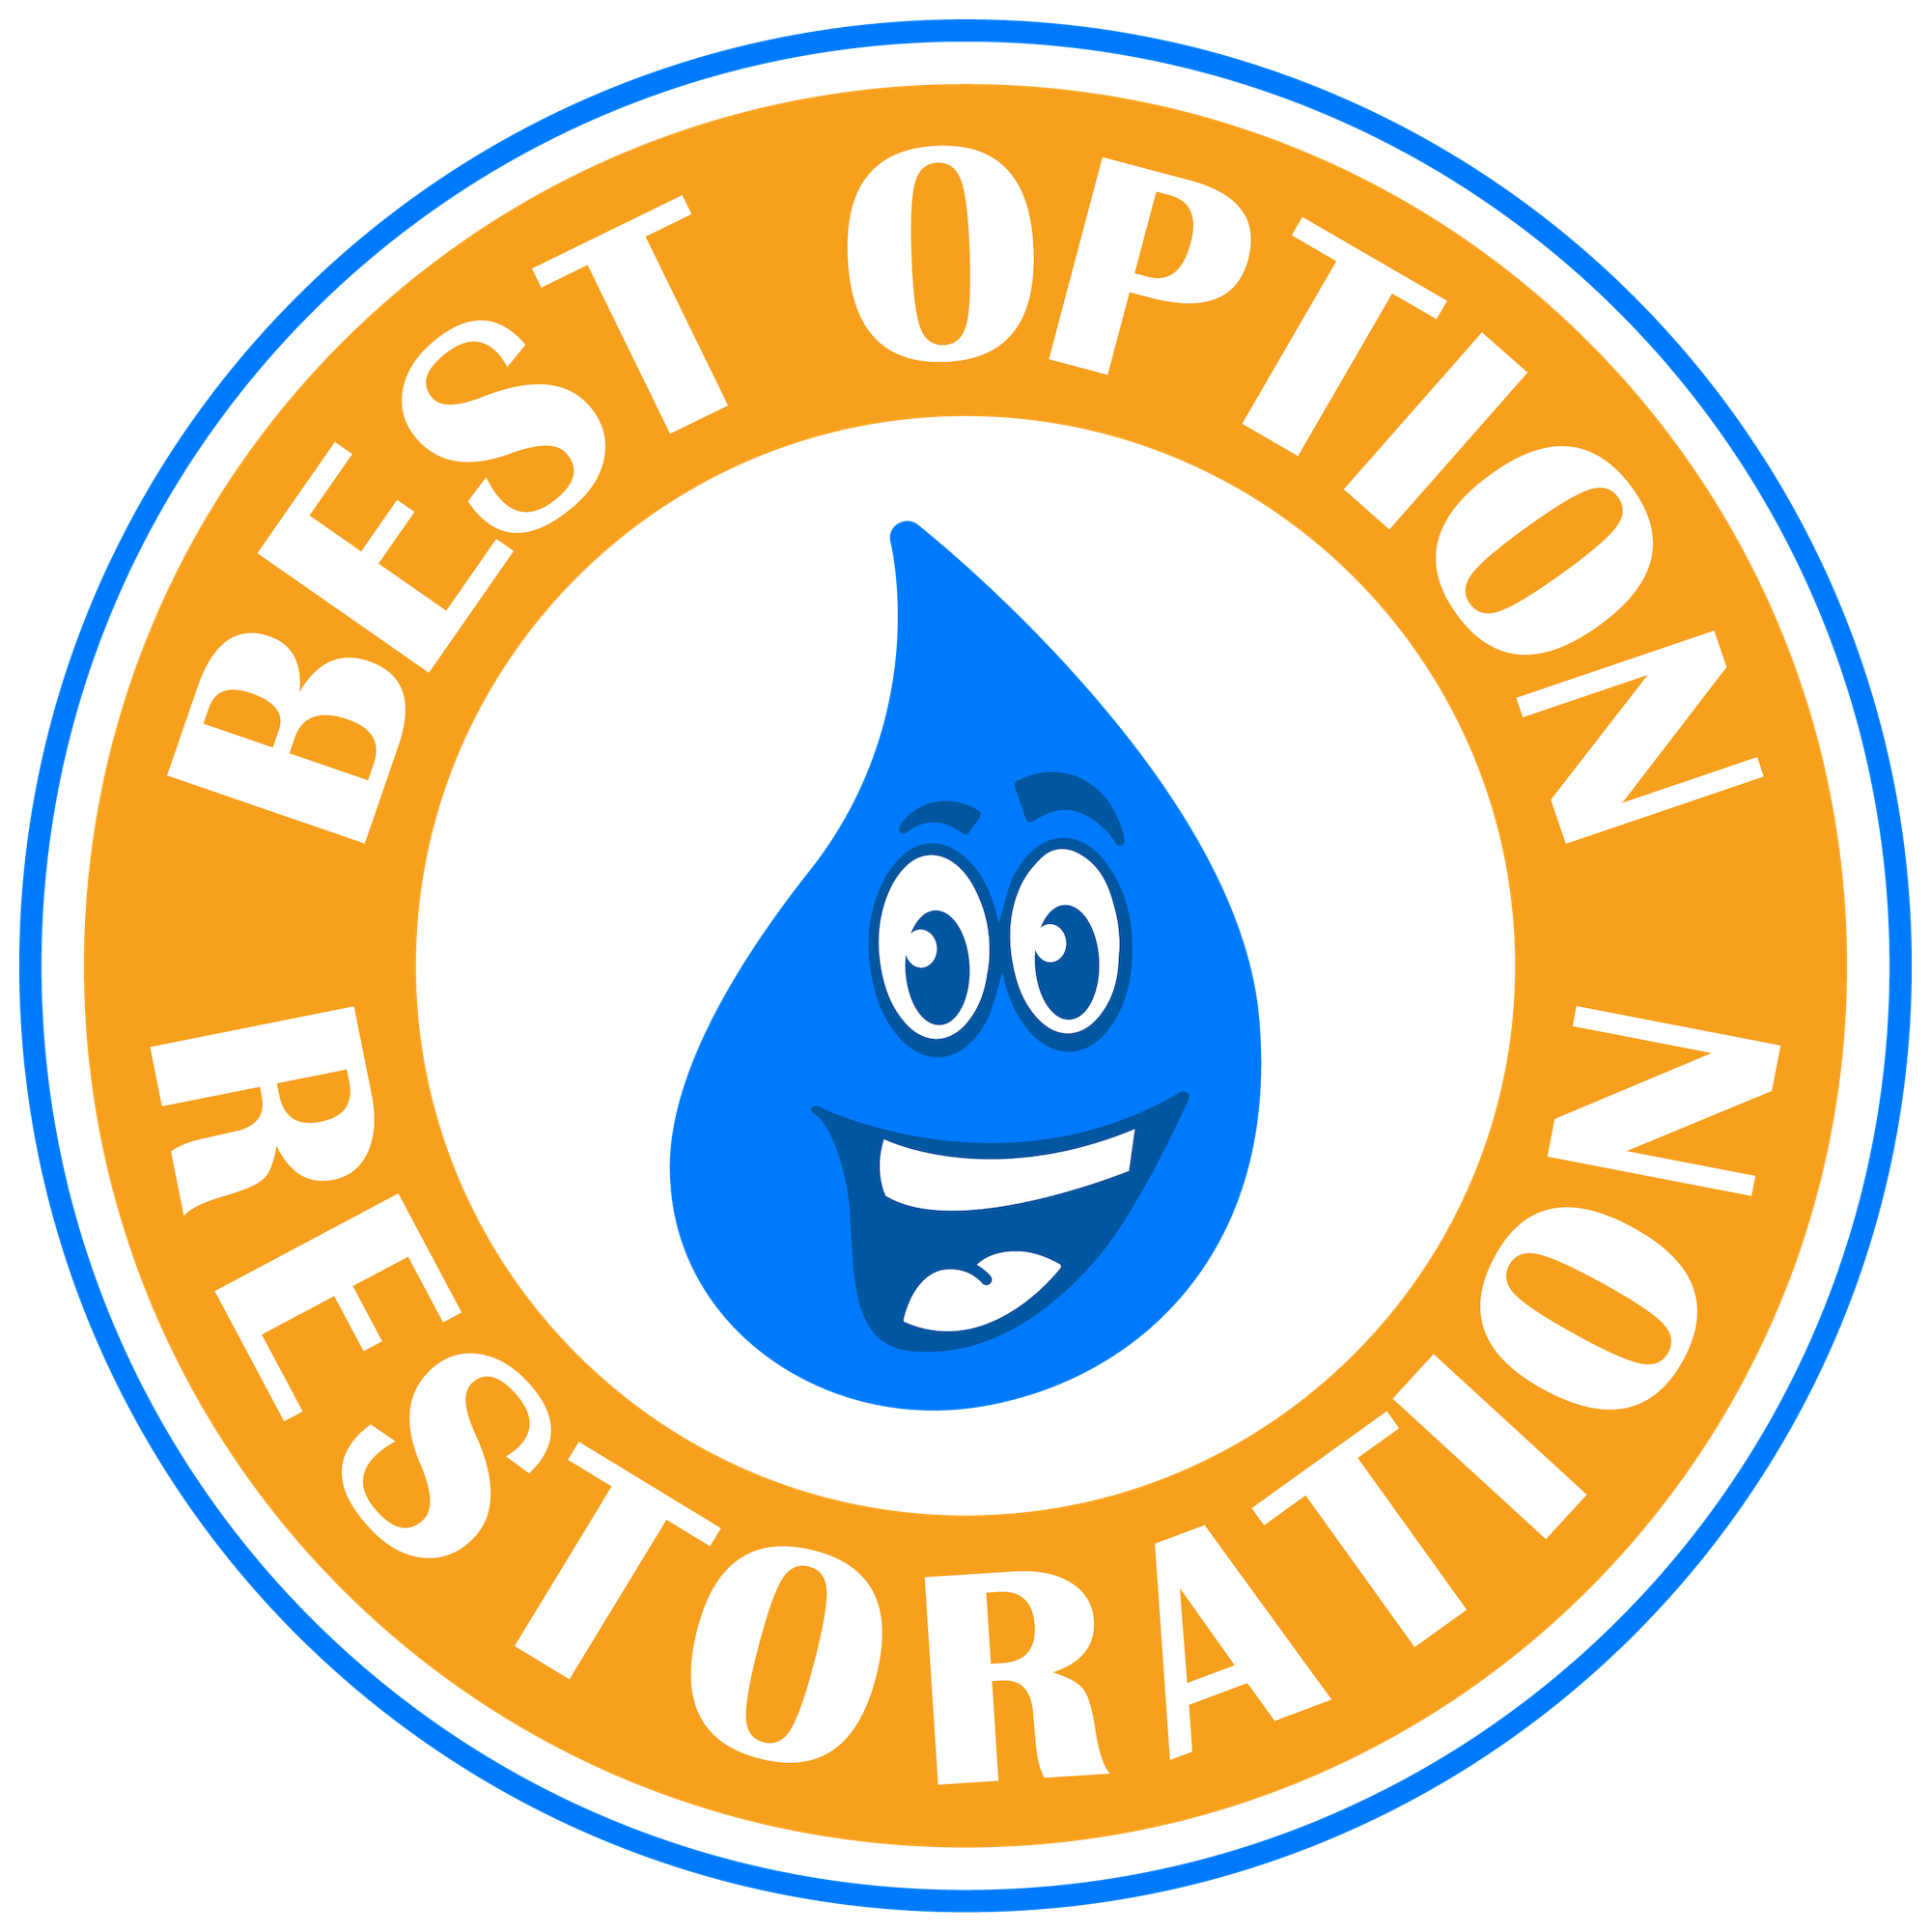 Disaster Restoration Company, Water Damage Repair Service in Plano, Texas